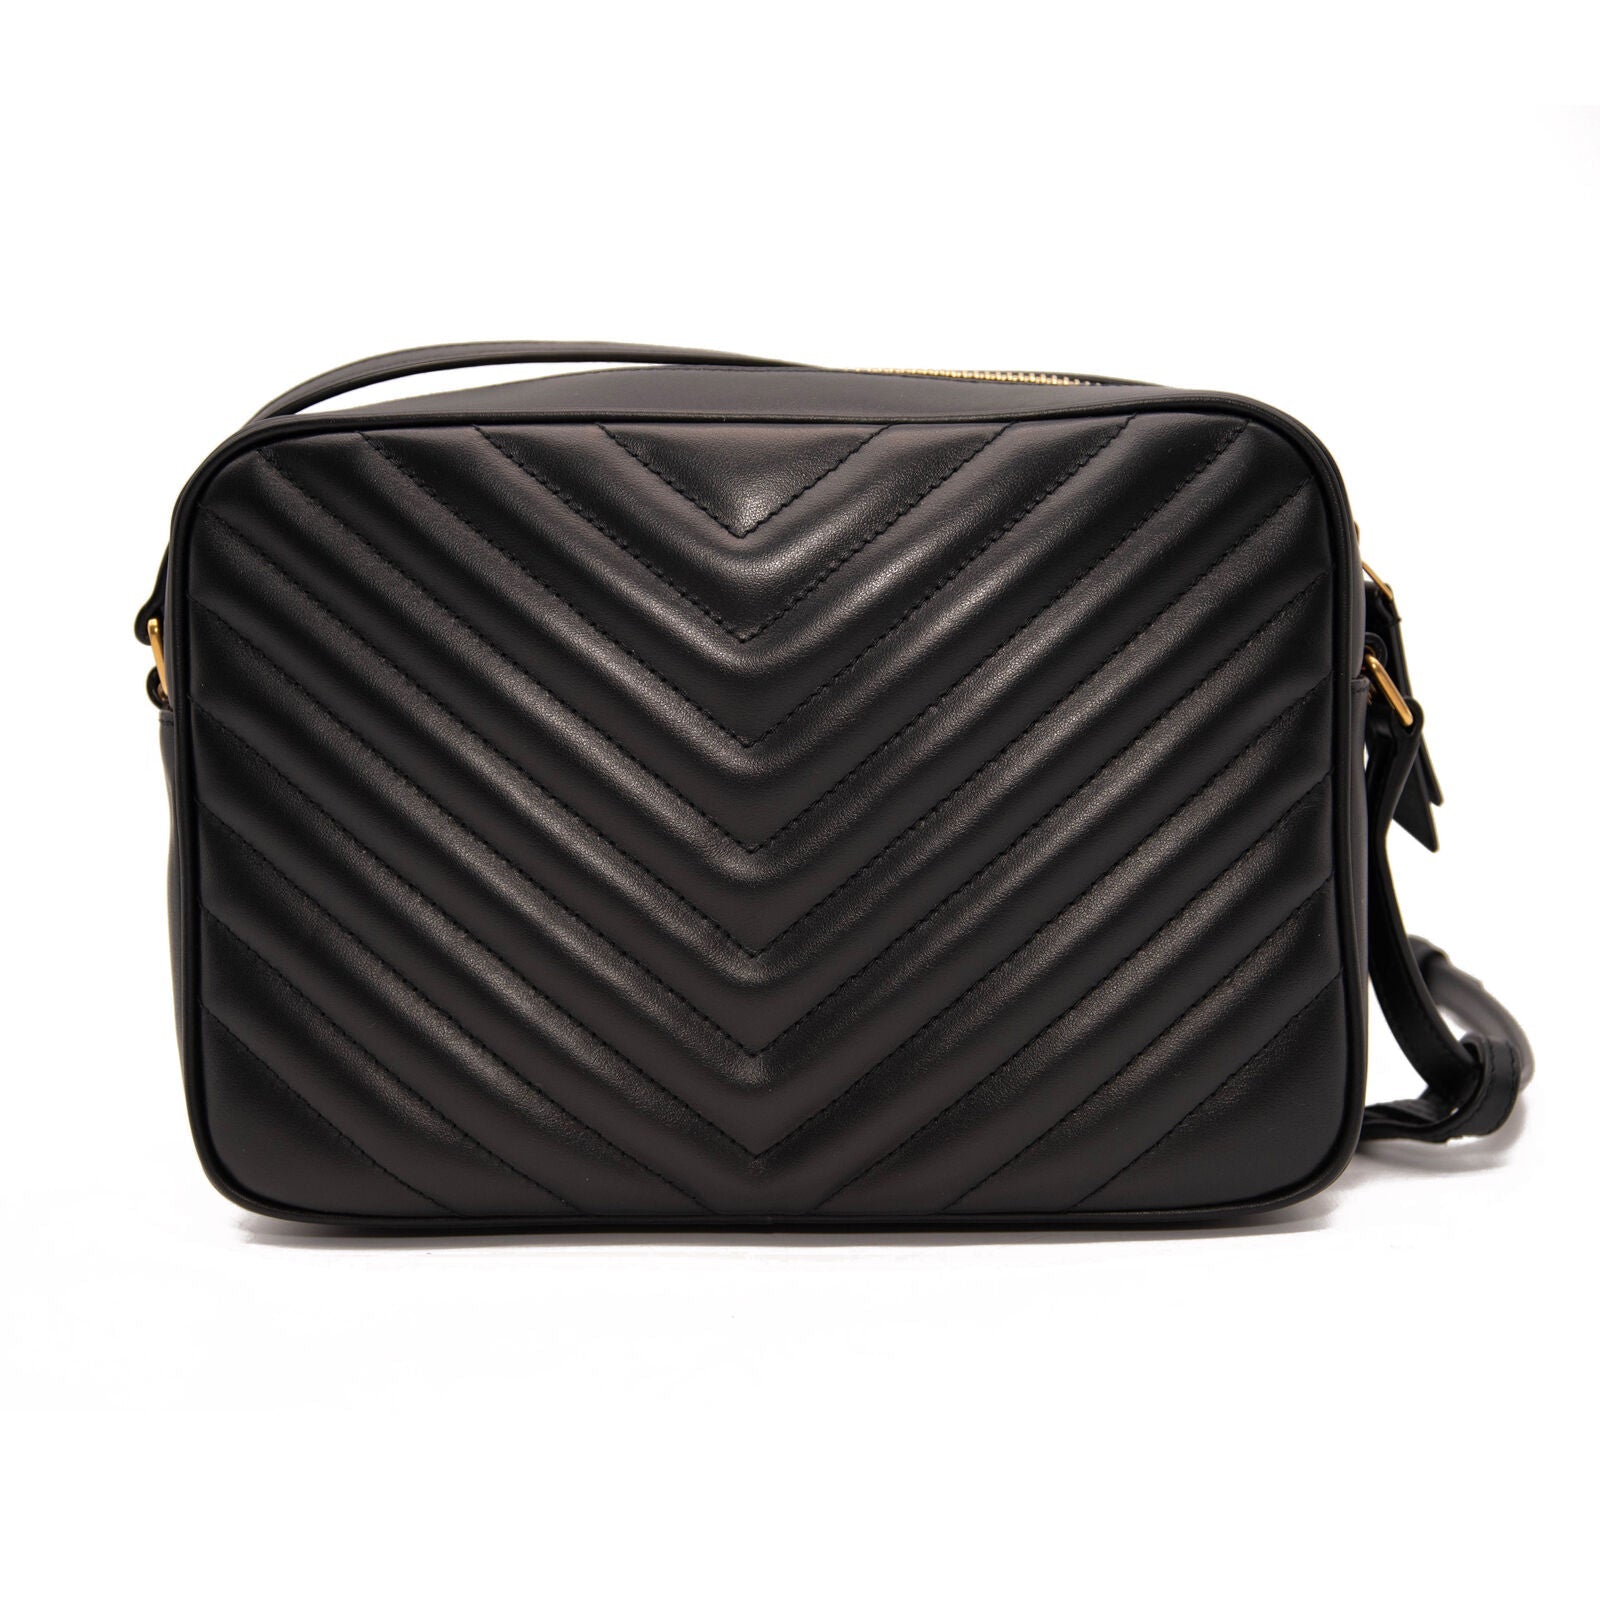 Saint Laurent Lou Camera Bag in Quilted Leather - Black - Women